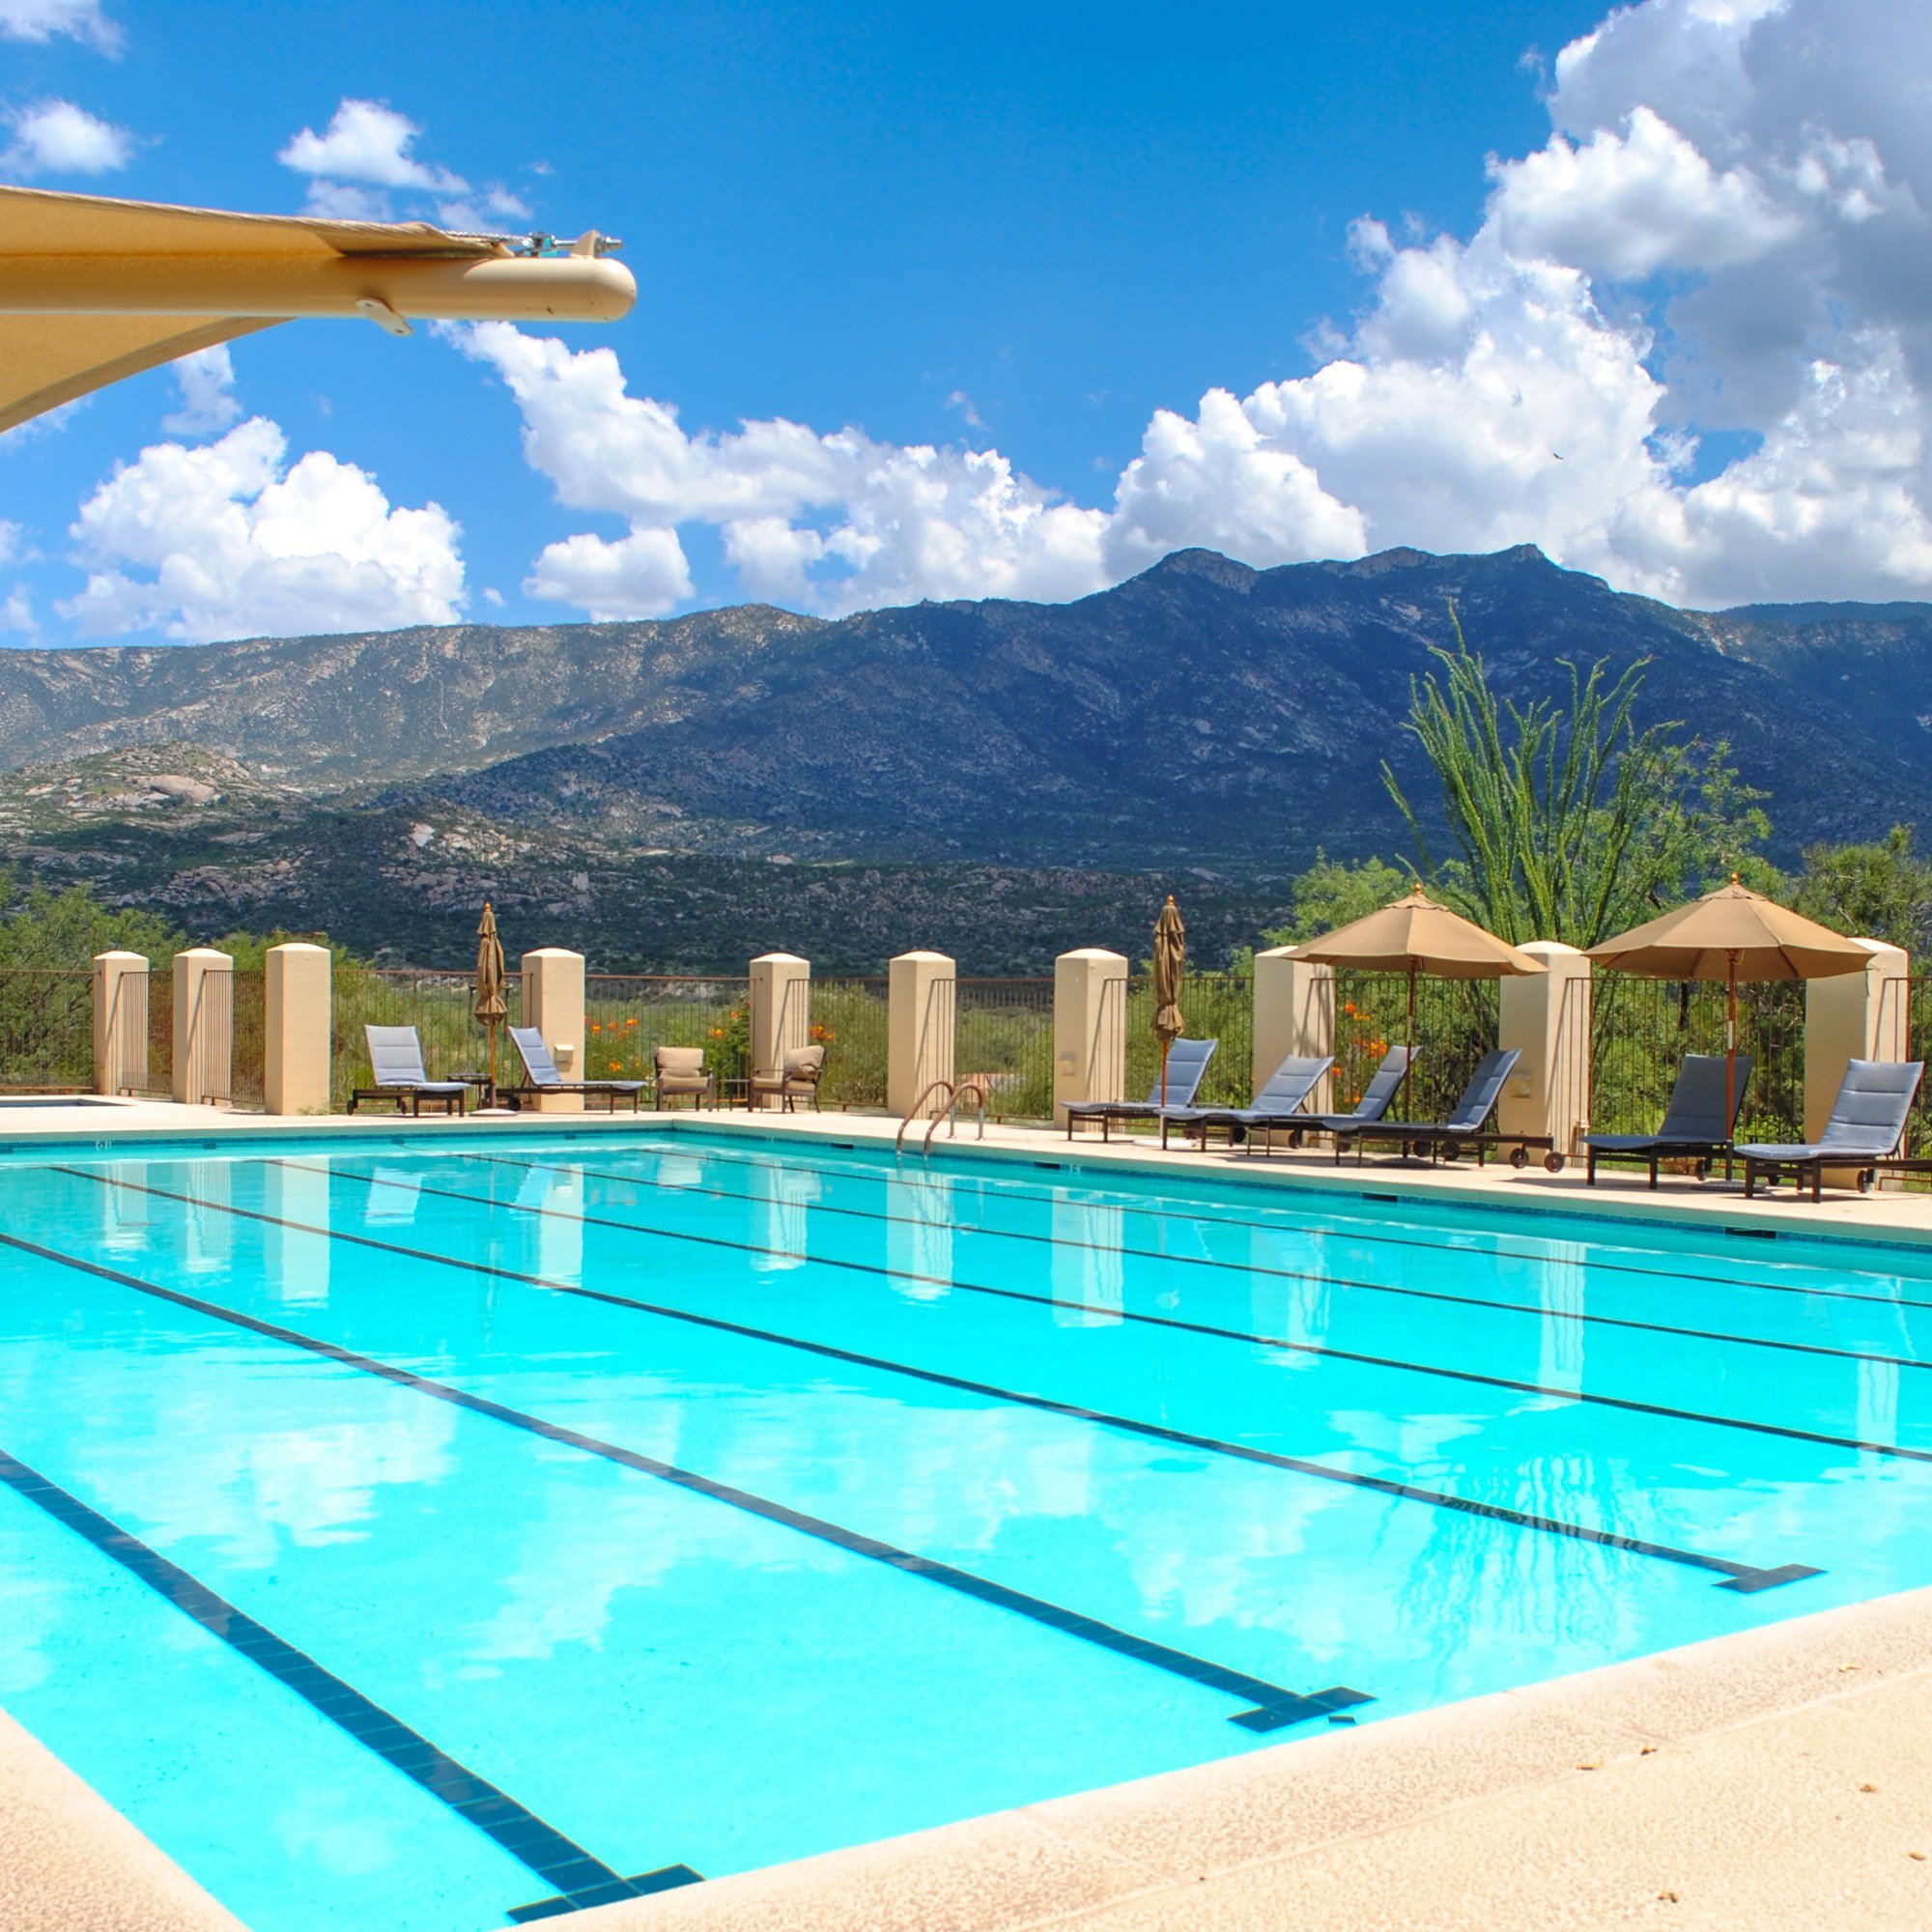 Miraval Arizona Resort & Spa Review (A Better You?)